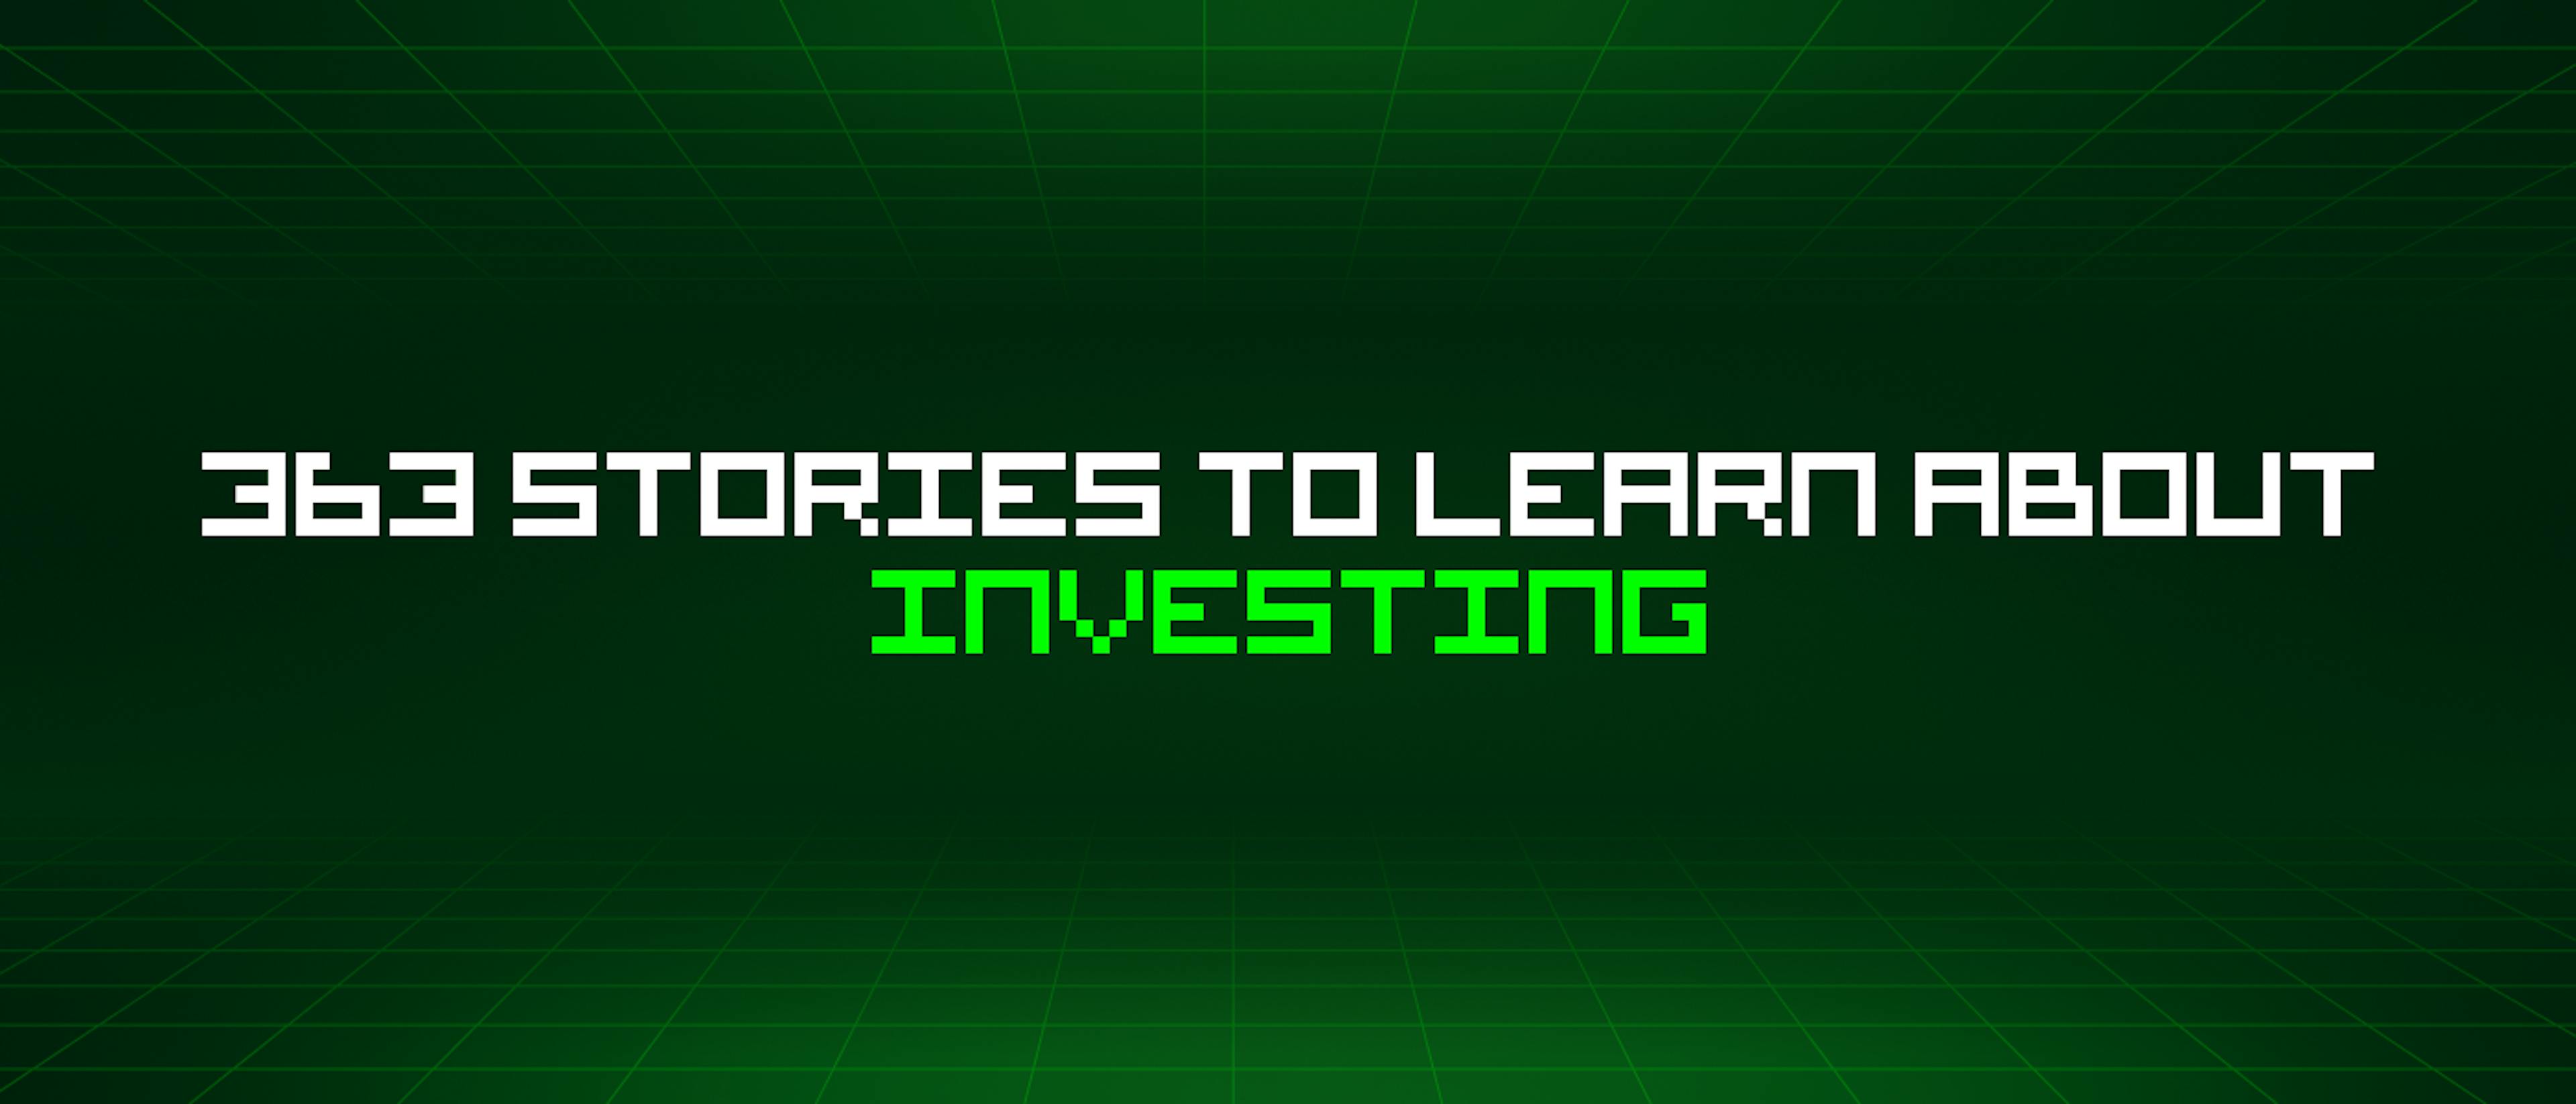 featured image - 363 Stories To Learn About Investing